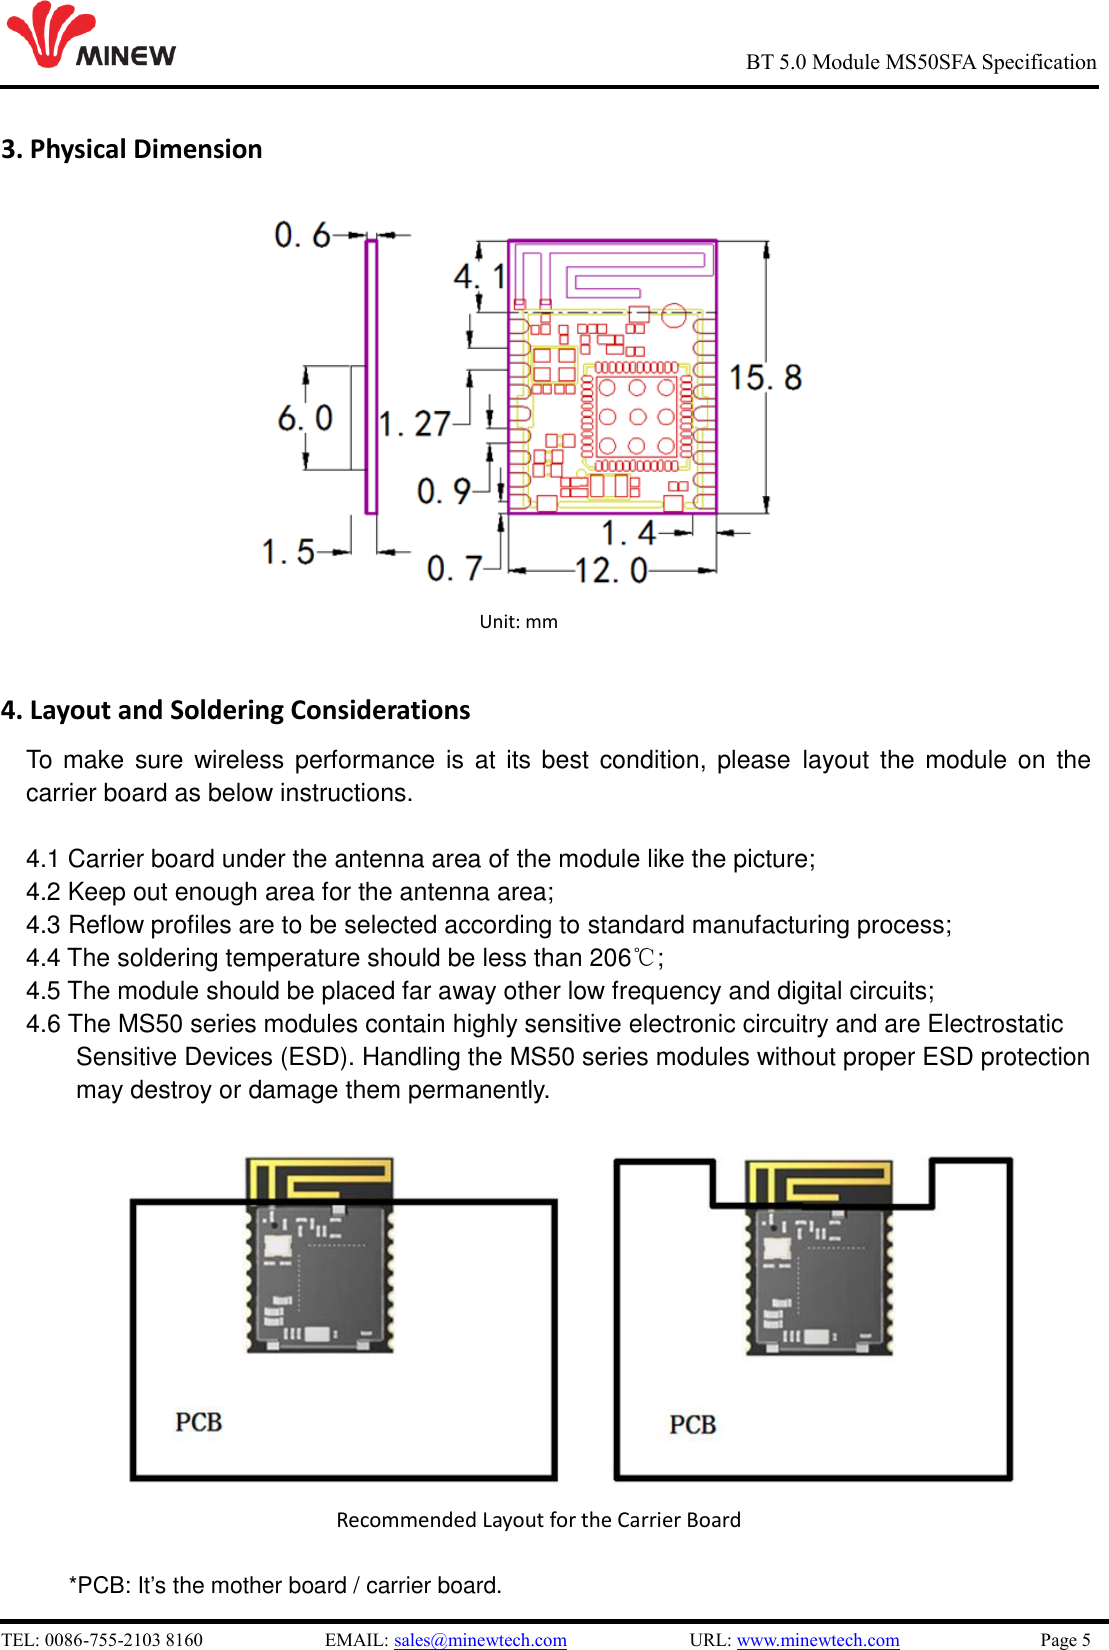   TEL: 0086-755-2103 8160                          EMAIL: sales@minewtech.com                          URL: www.minewtech.com                              Page 5                                                     BT 5.0 Module MS50SFA Specification 3. Physical Dimension          Unit: mm       4. Layout and Soldering Considerations To make sure wireless  performance is at its  best  condition, please  layout  the  module on the carrier board as below instructions.    4.1 Carrier board under the antenna area of the module like the picture; 4.2 Keep out enough area for the antenna area;   4.3 Reflow profiles are to be selected according to standard manufacturing process;   4.4 The soldering temperature should be less than 206℃;   4.5 The module should be placed far away other low frequency and digital circuits; 4.6 The MS50 series modules contain highly sensitive electronic circuitry and are Electrostatic Sensitive Devices (ESD). Handling the MS50 series modules without proper ESD protection   may destroy or damage them permanently.                                     Recommended Layout for the Carrier Board  *PCB: It’s the mother board / carrier board.                      Unit: mm 